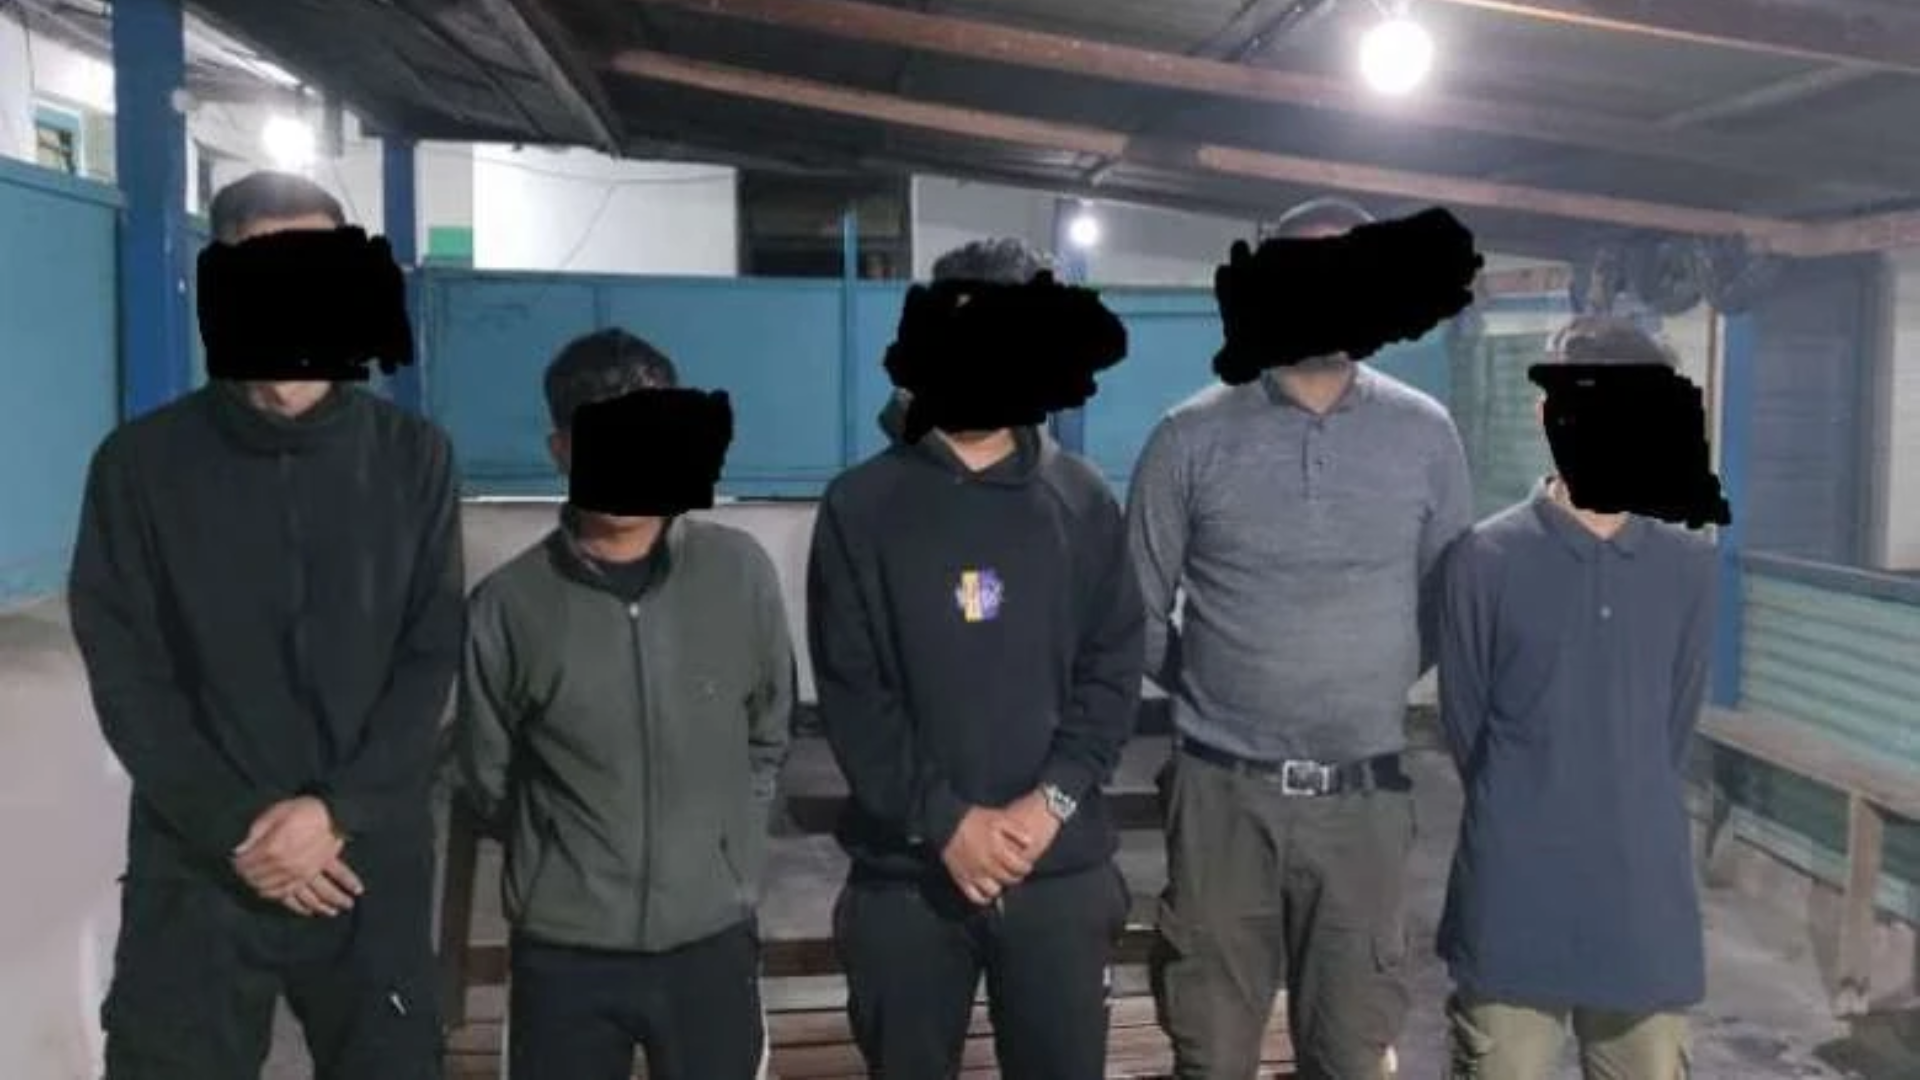 Manipur Police Rescues Kidnapping Victims, Arrests Suspects For Illegal Possession Of Drugs And Ammunitions